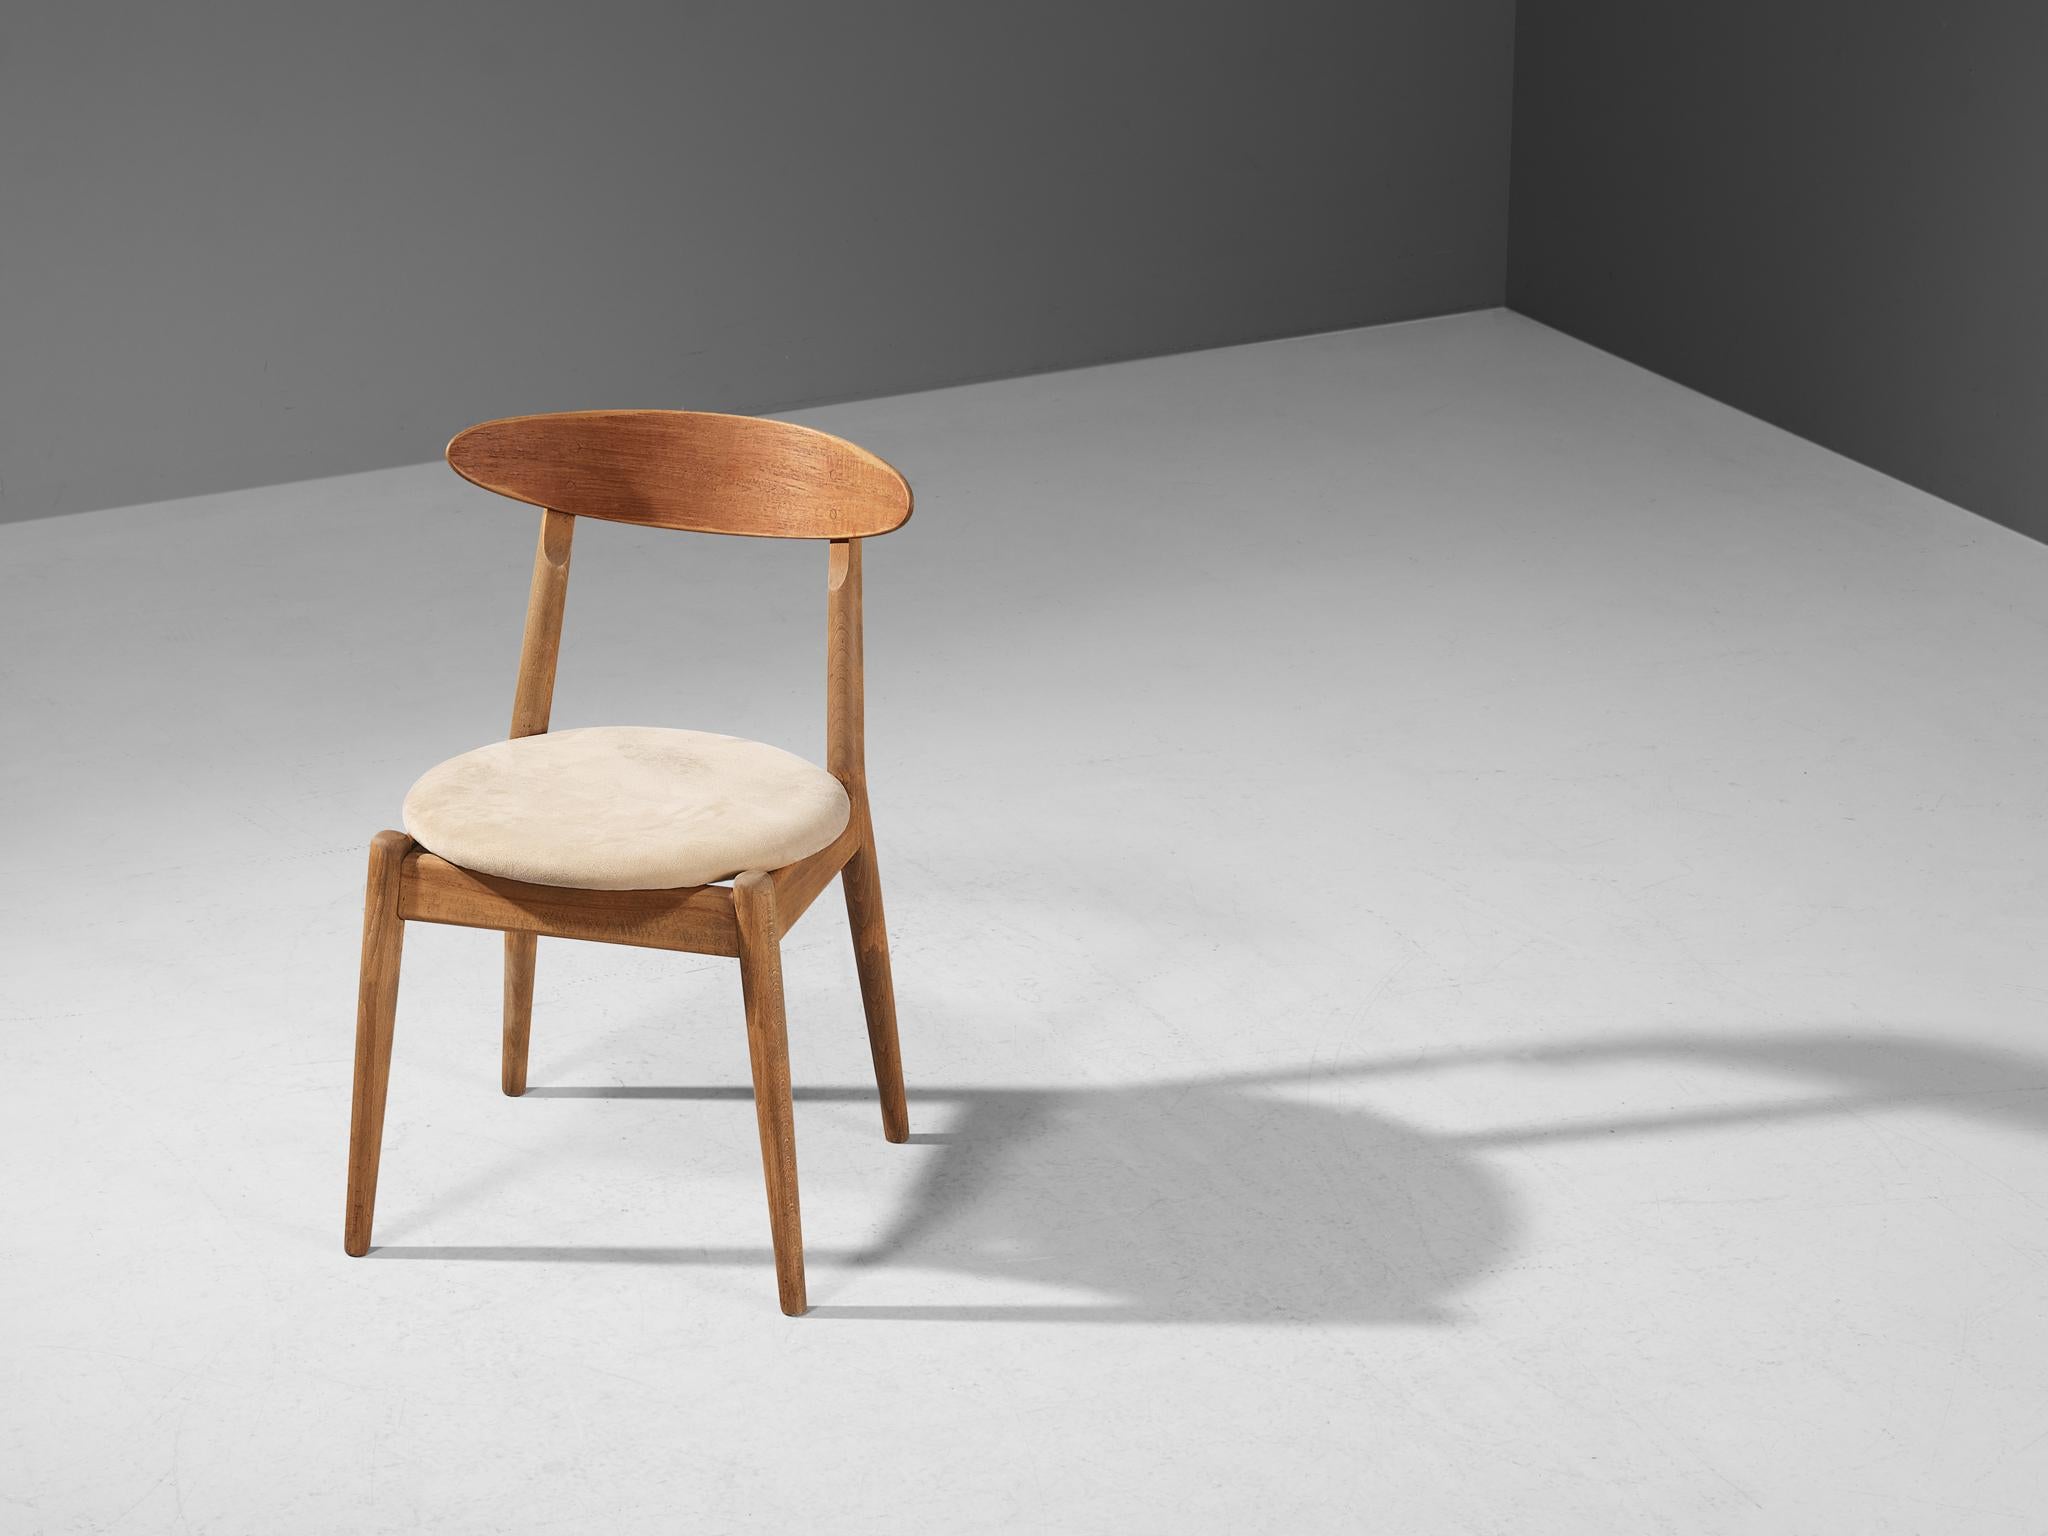 Jørgen Bo and Vilhelm Wohlert for P. Jeppesens Møbelfabrik, ‘Louisiana’ dining chair, oak, suede, Denmark, 1958.

The ‘Louisiana’ chair was initially created for the Louisiana Museum of Modern Art in Humlebæk, Denmark, by the Danish